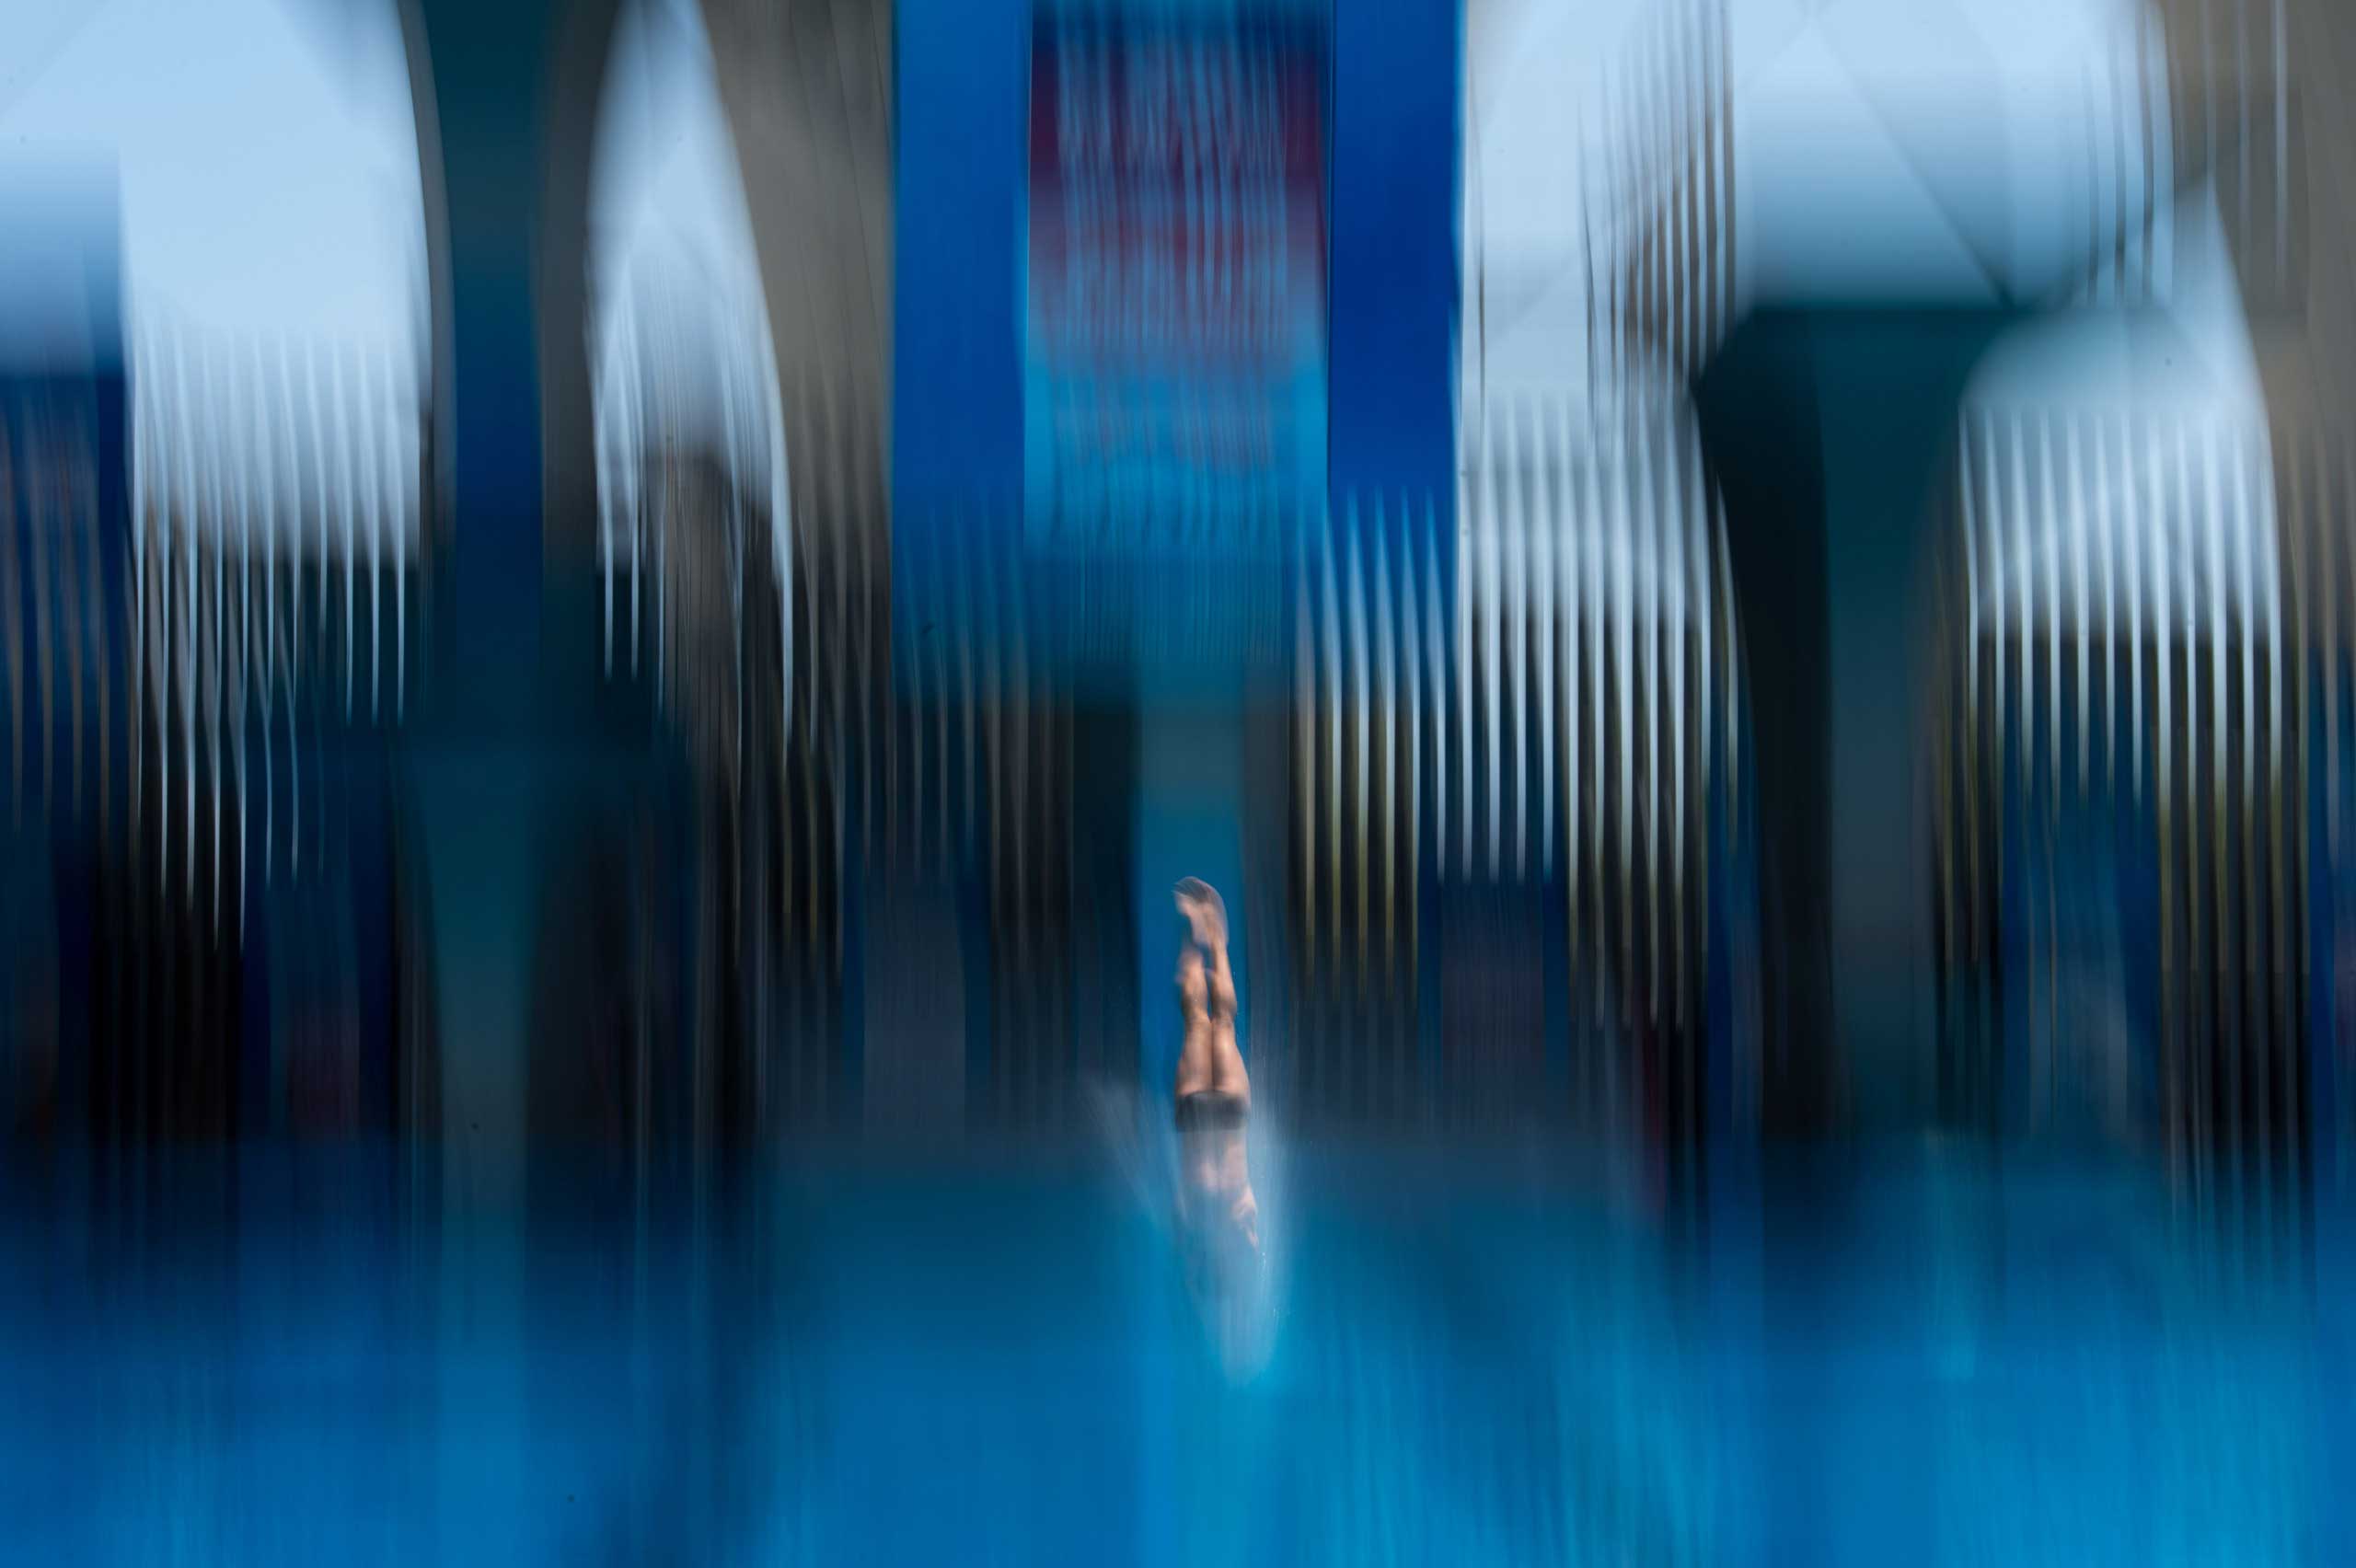 David Dinsmore of the US competes during the men's 10 metre semi-final platform event at the 19th FINA Diving World Cup in Shanghai on July 20, 2014.